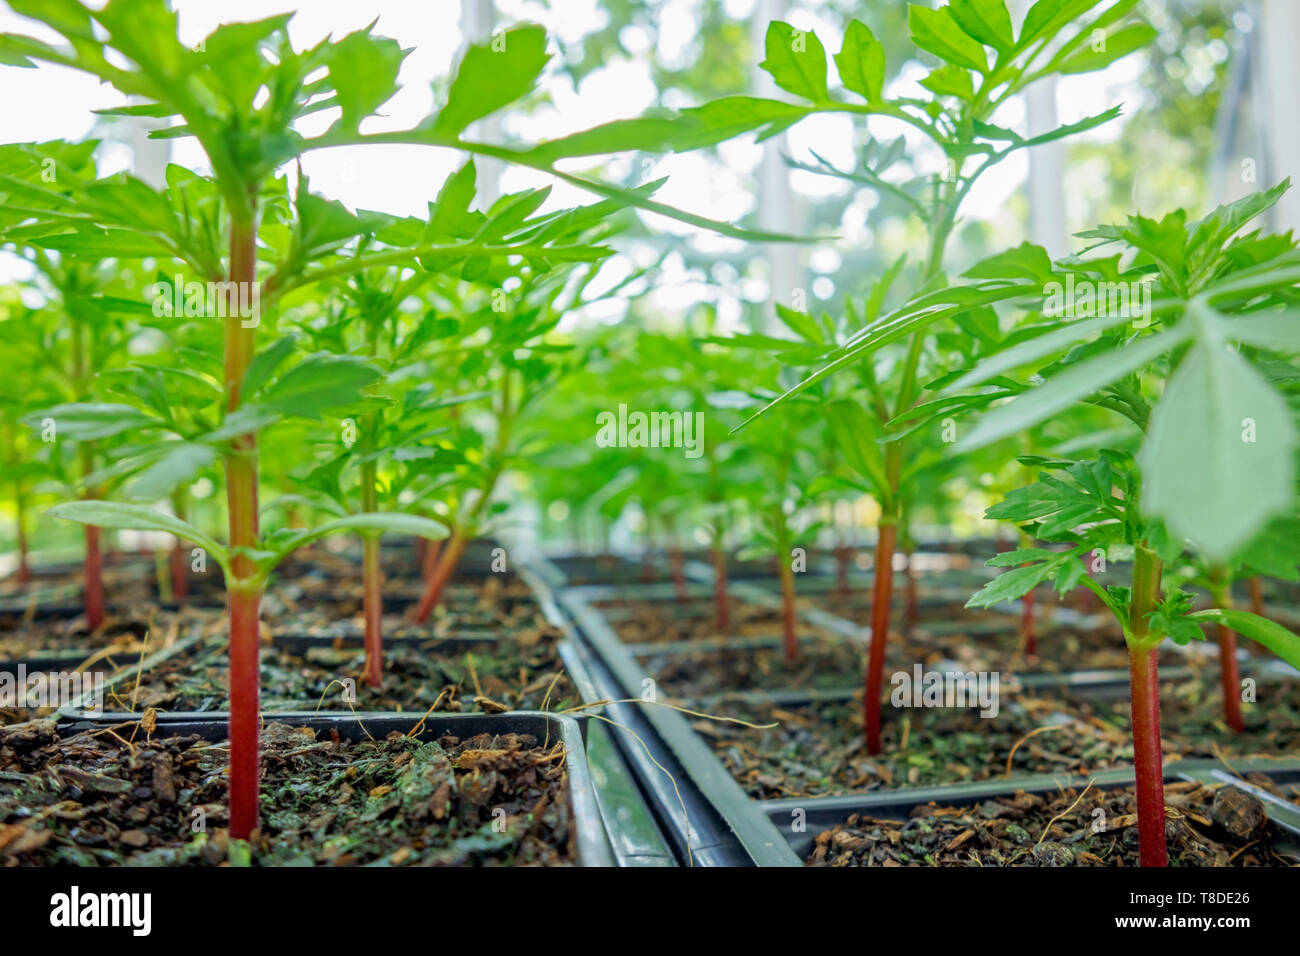 Young Marigold plants growing in trays in a greenhouse. Stock Photo